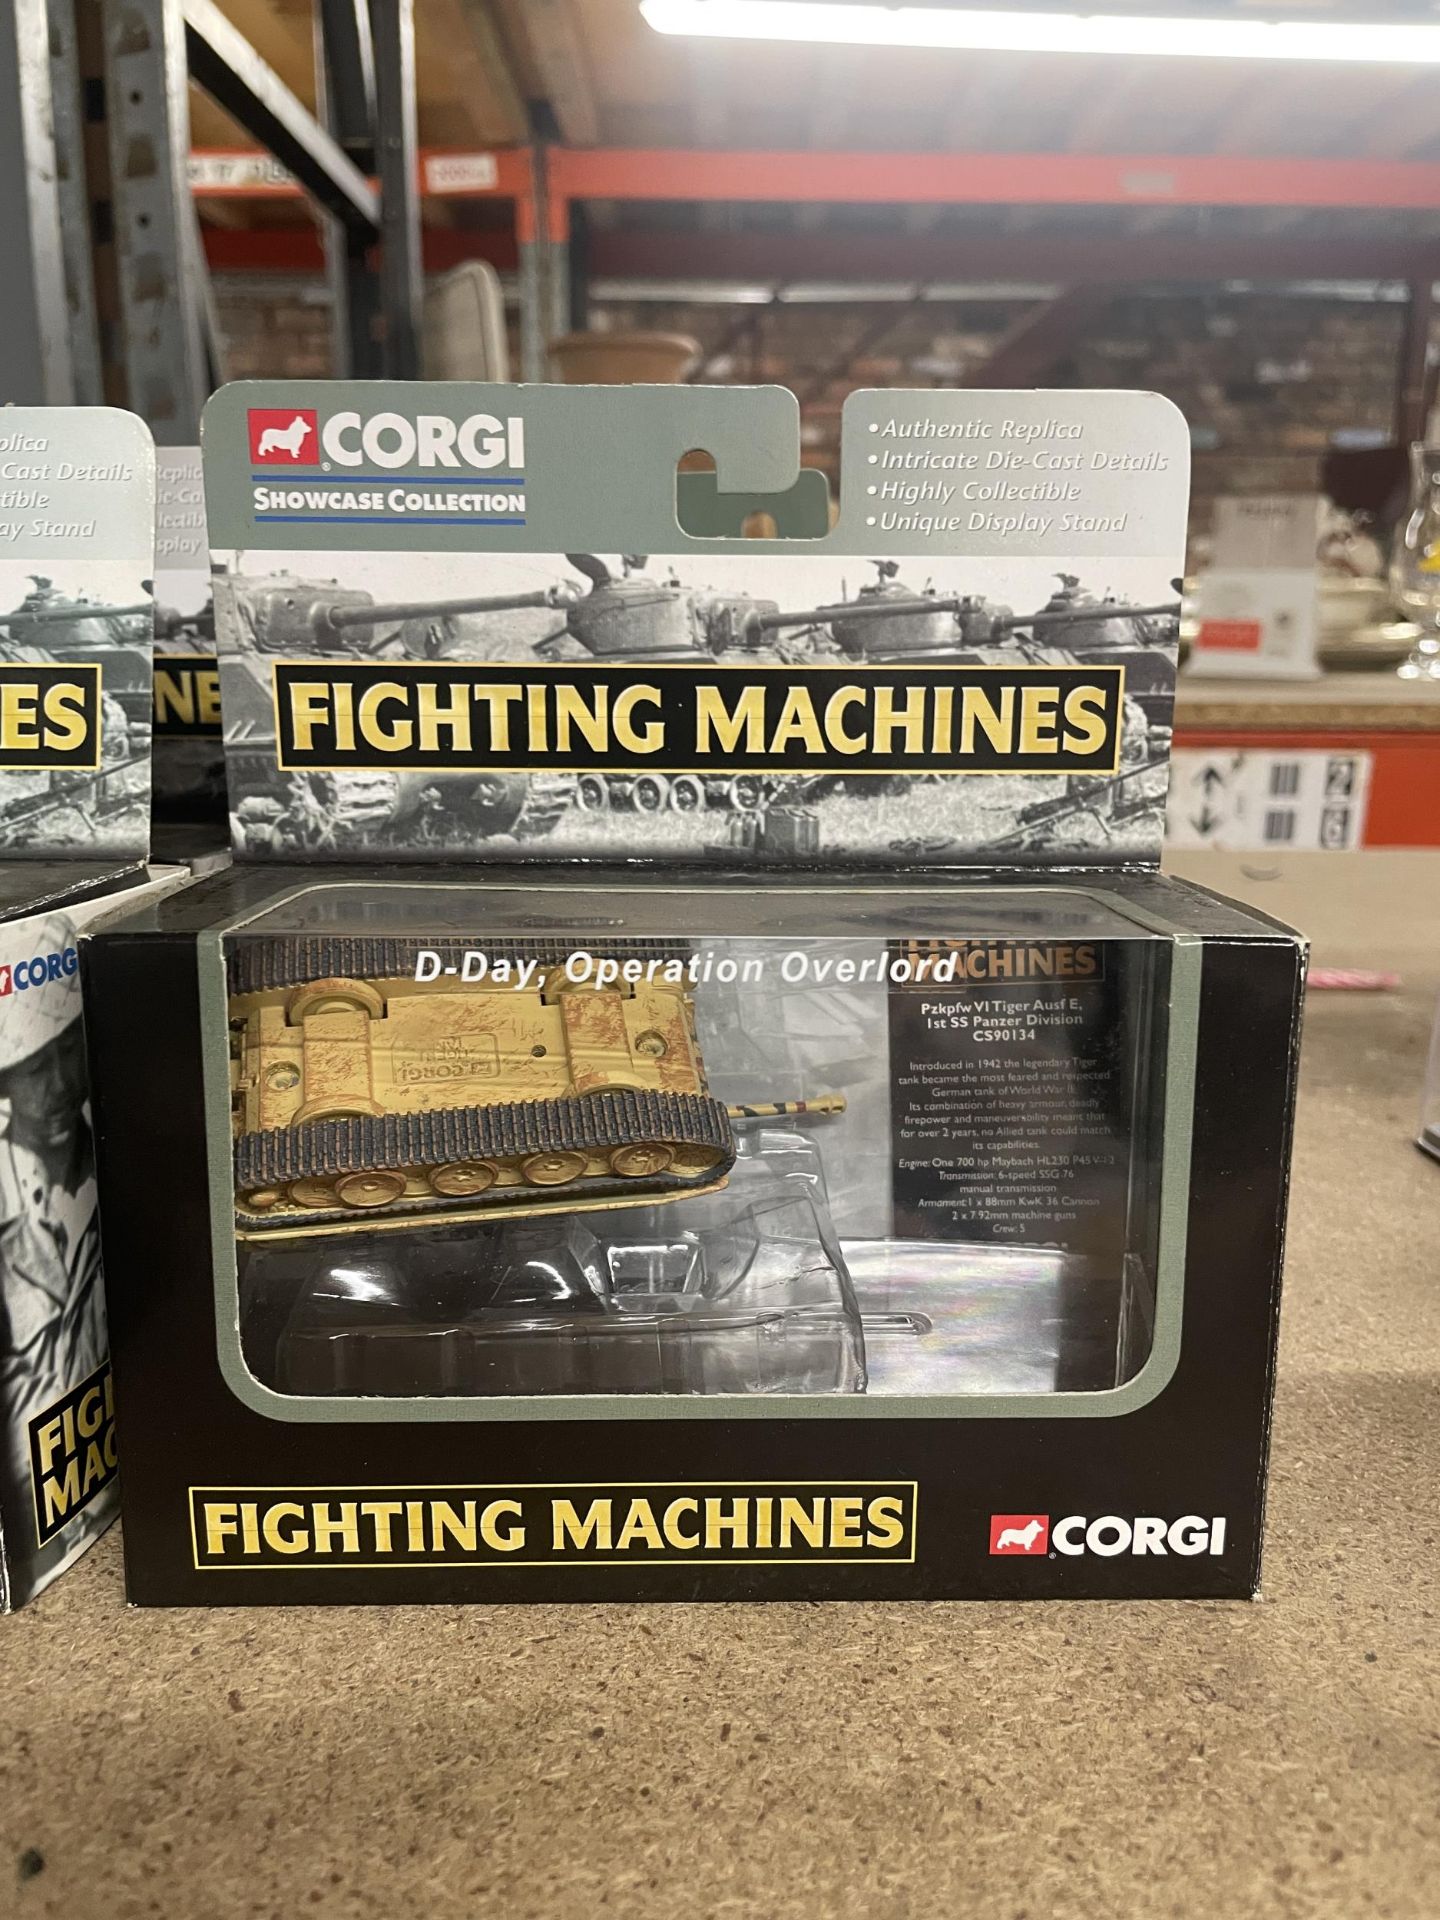 SEVEN BOXED CORGI SHOWCASE COLLECTION FIGHTING MACHINES TO INCLUDE D-DAY OPERATION OVERLORD TANKS, - Image 3 of 3